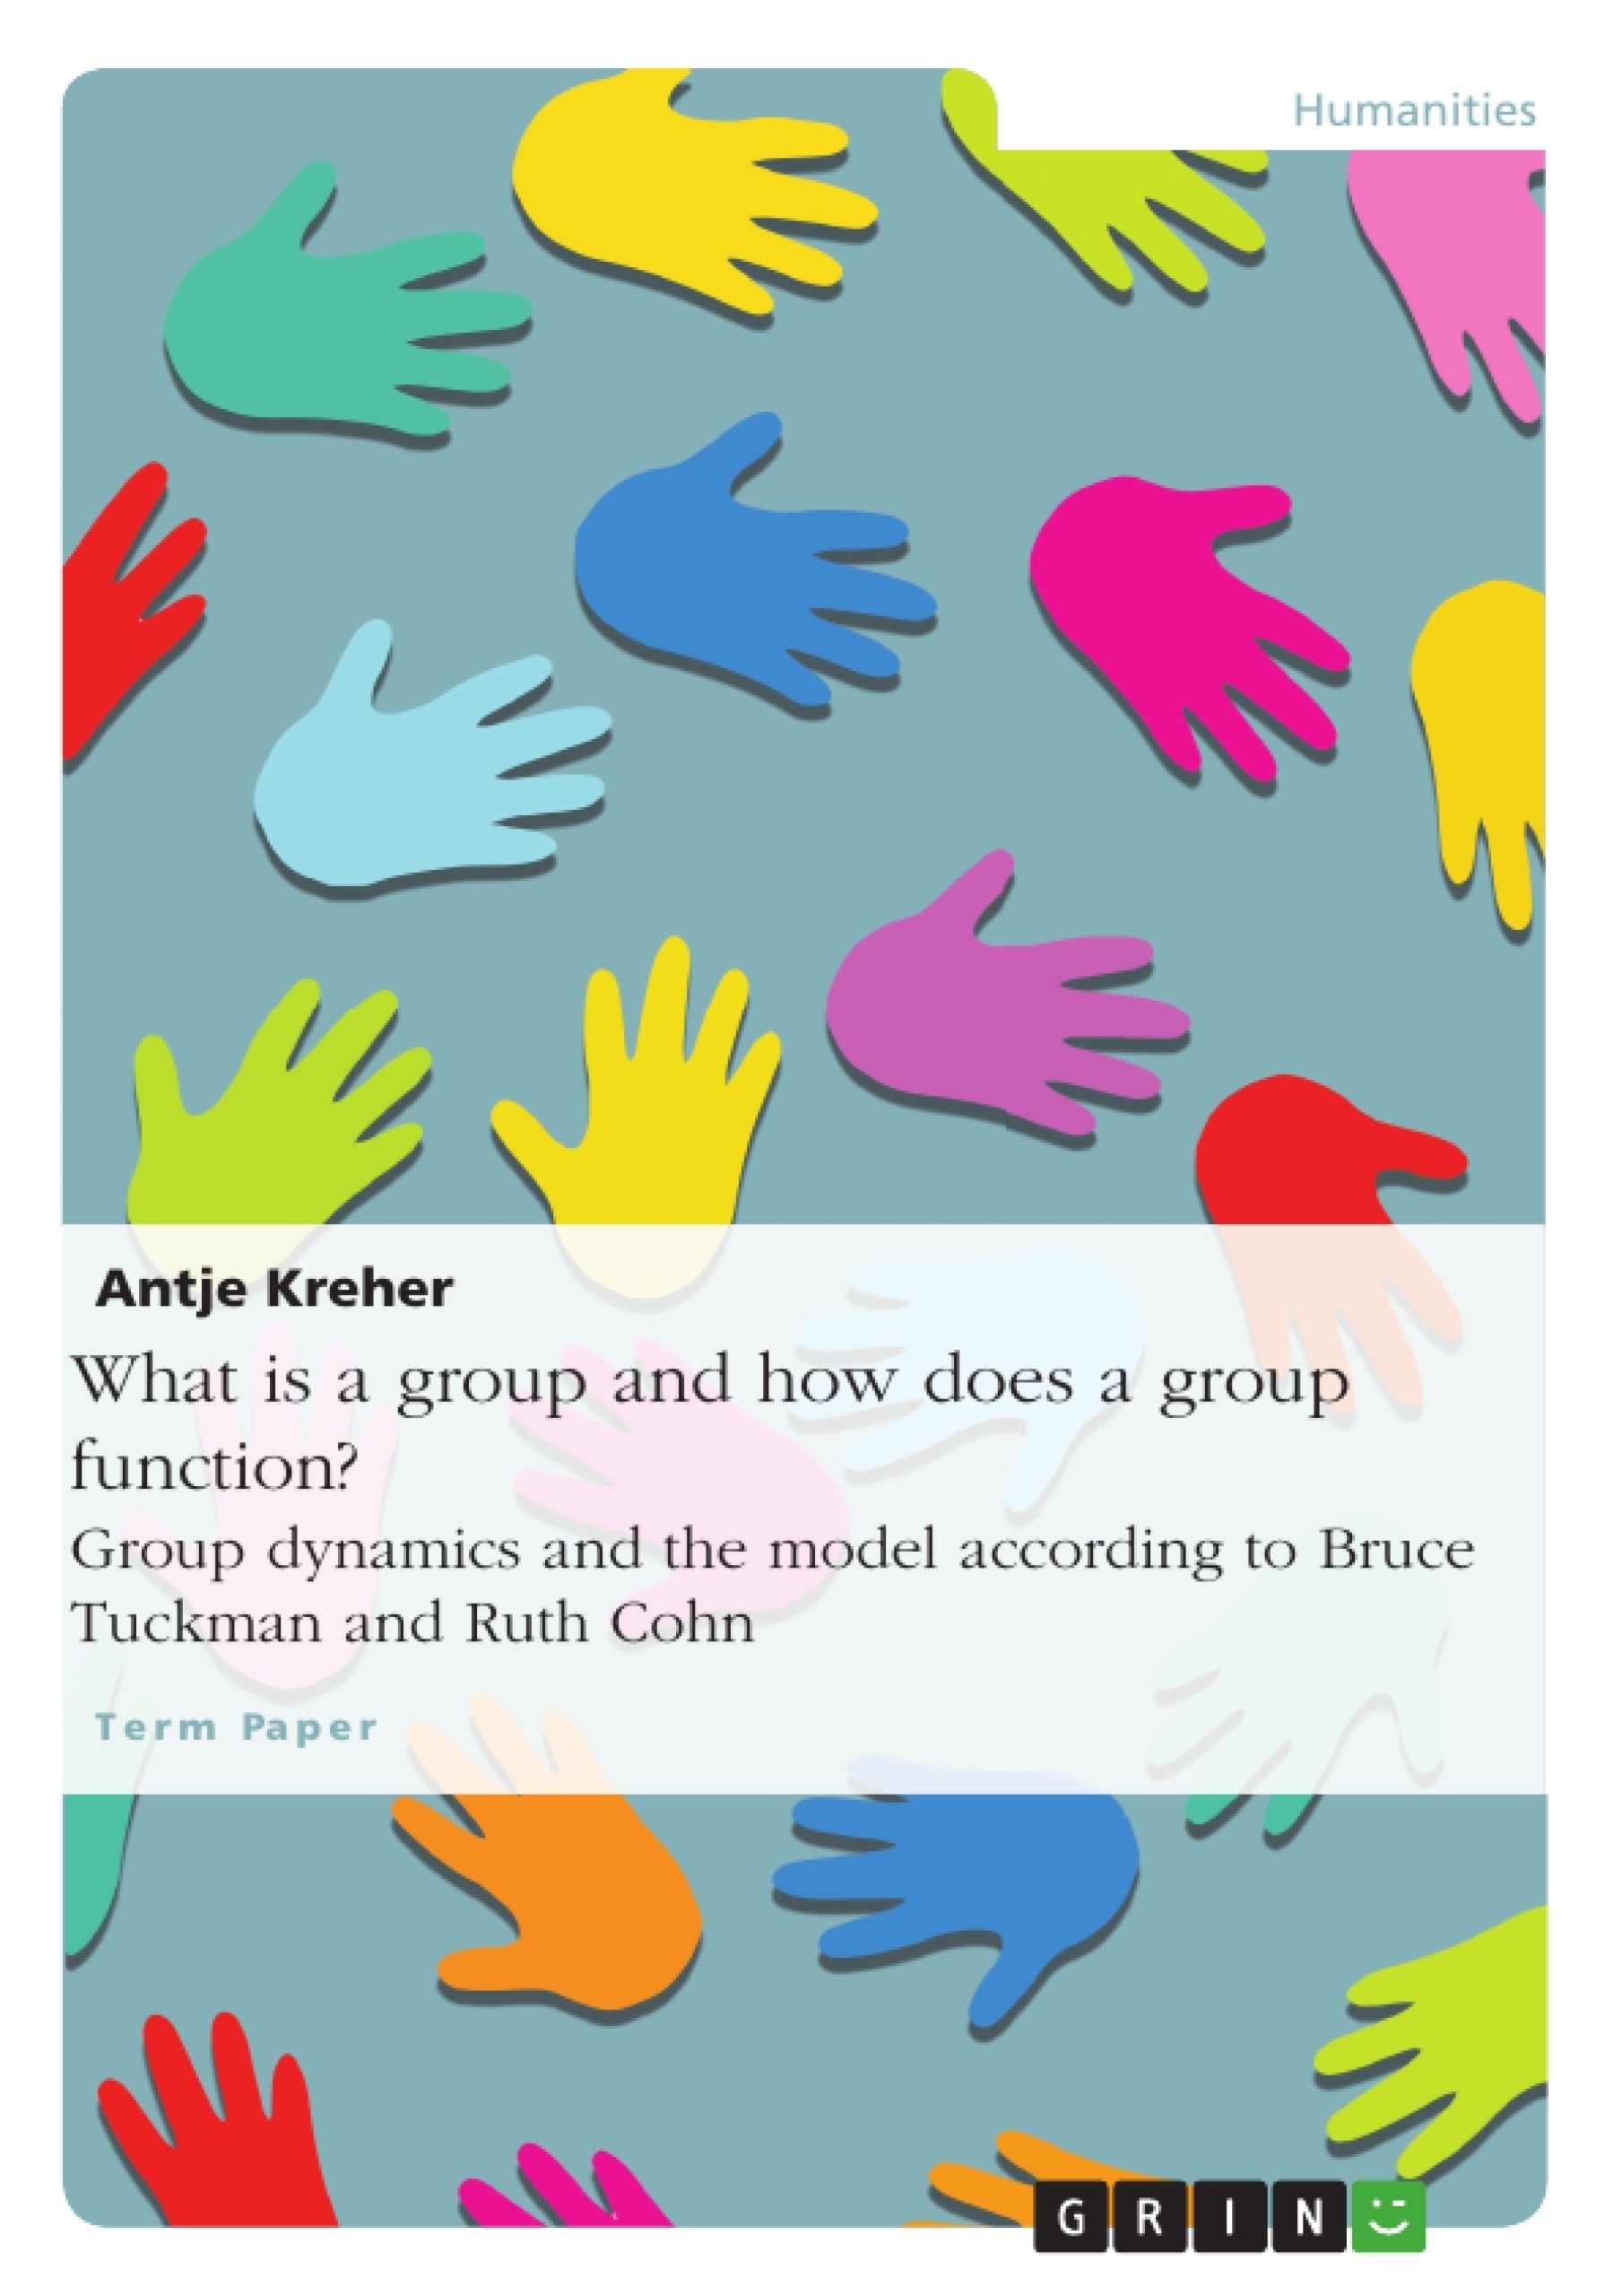 Titel: What is a group and how does a group function? Group dynamics and the model according to Bruce Tuckman and Ruth Cohn